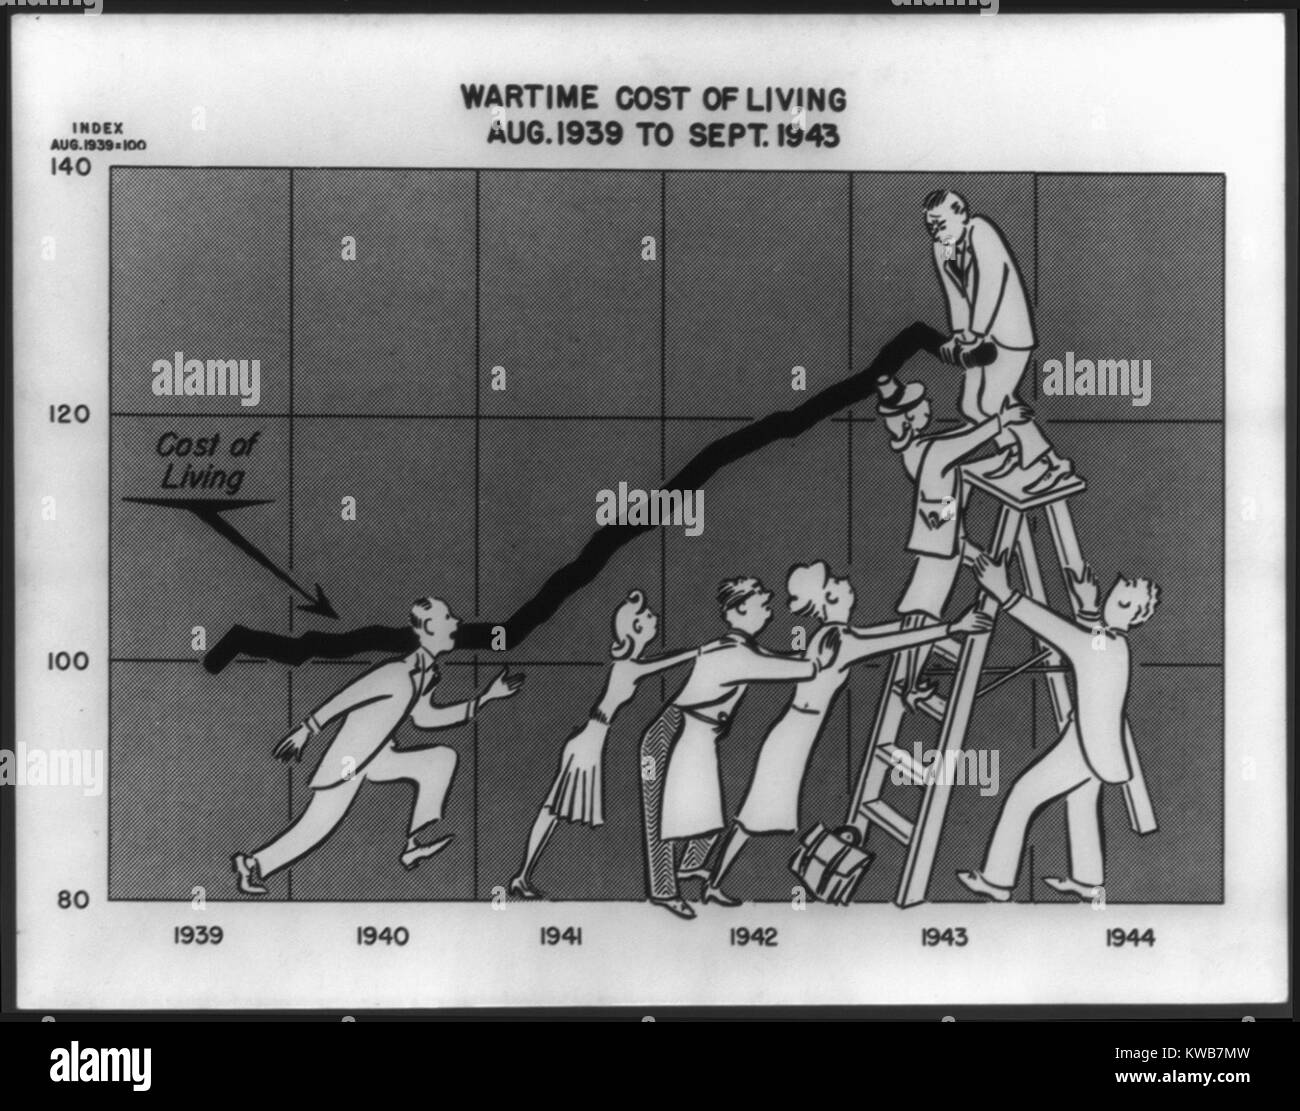 U.S. wartime cost of living, Aug. 1939 to Sept. 1943. Cartoon shows men and women on a graph trying to physically hold down the rising cost of living. In 1942-43, the inflation rate was over 10%. World War 2. (BSLOC 2014 10 247) Stock Photo